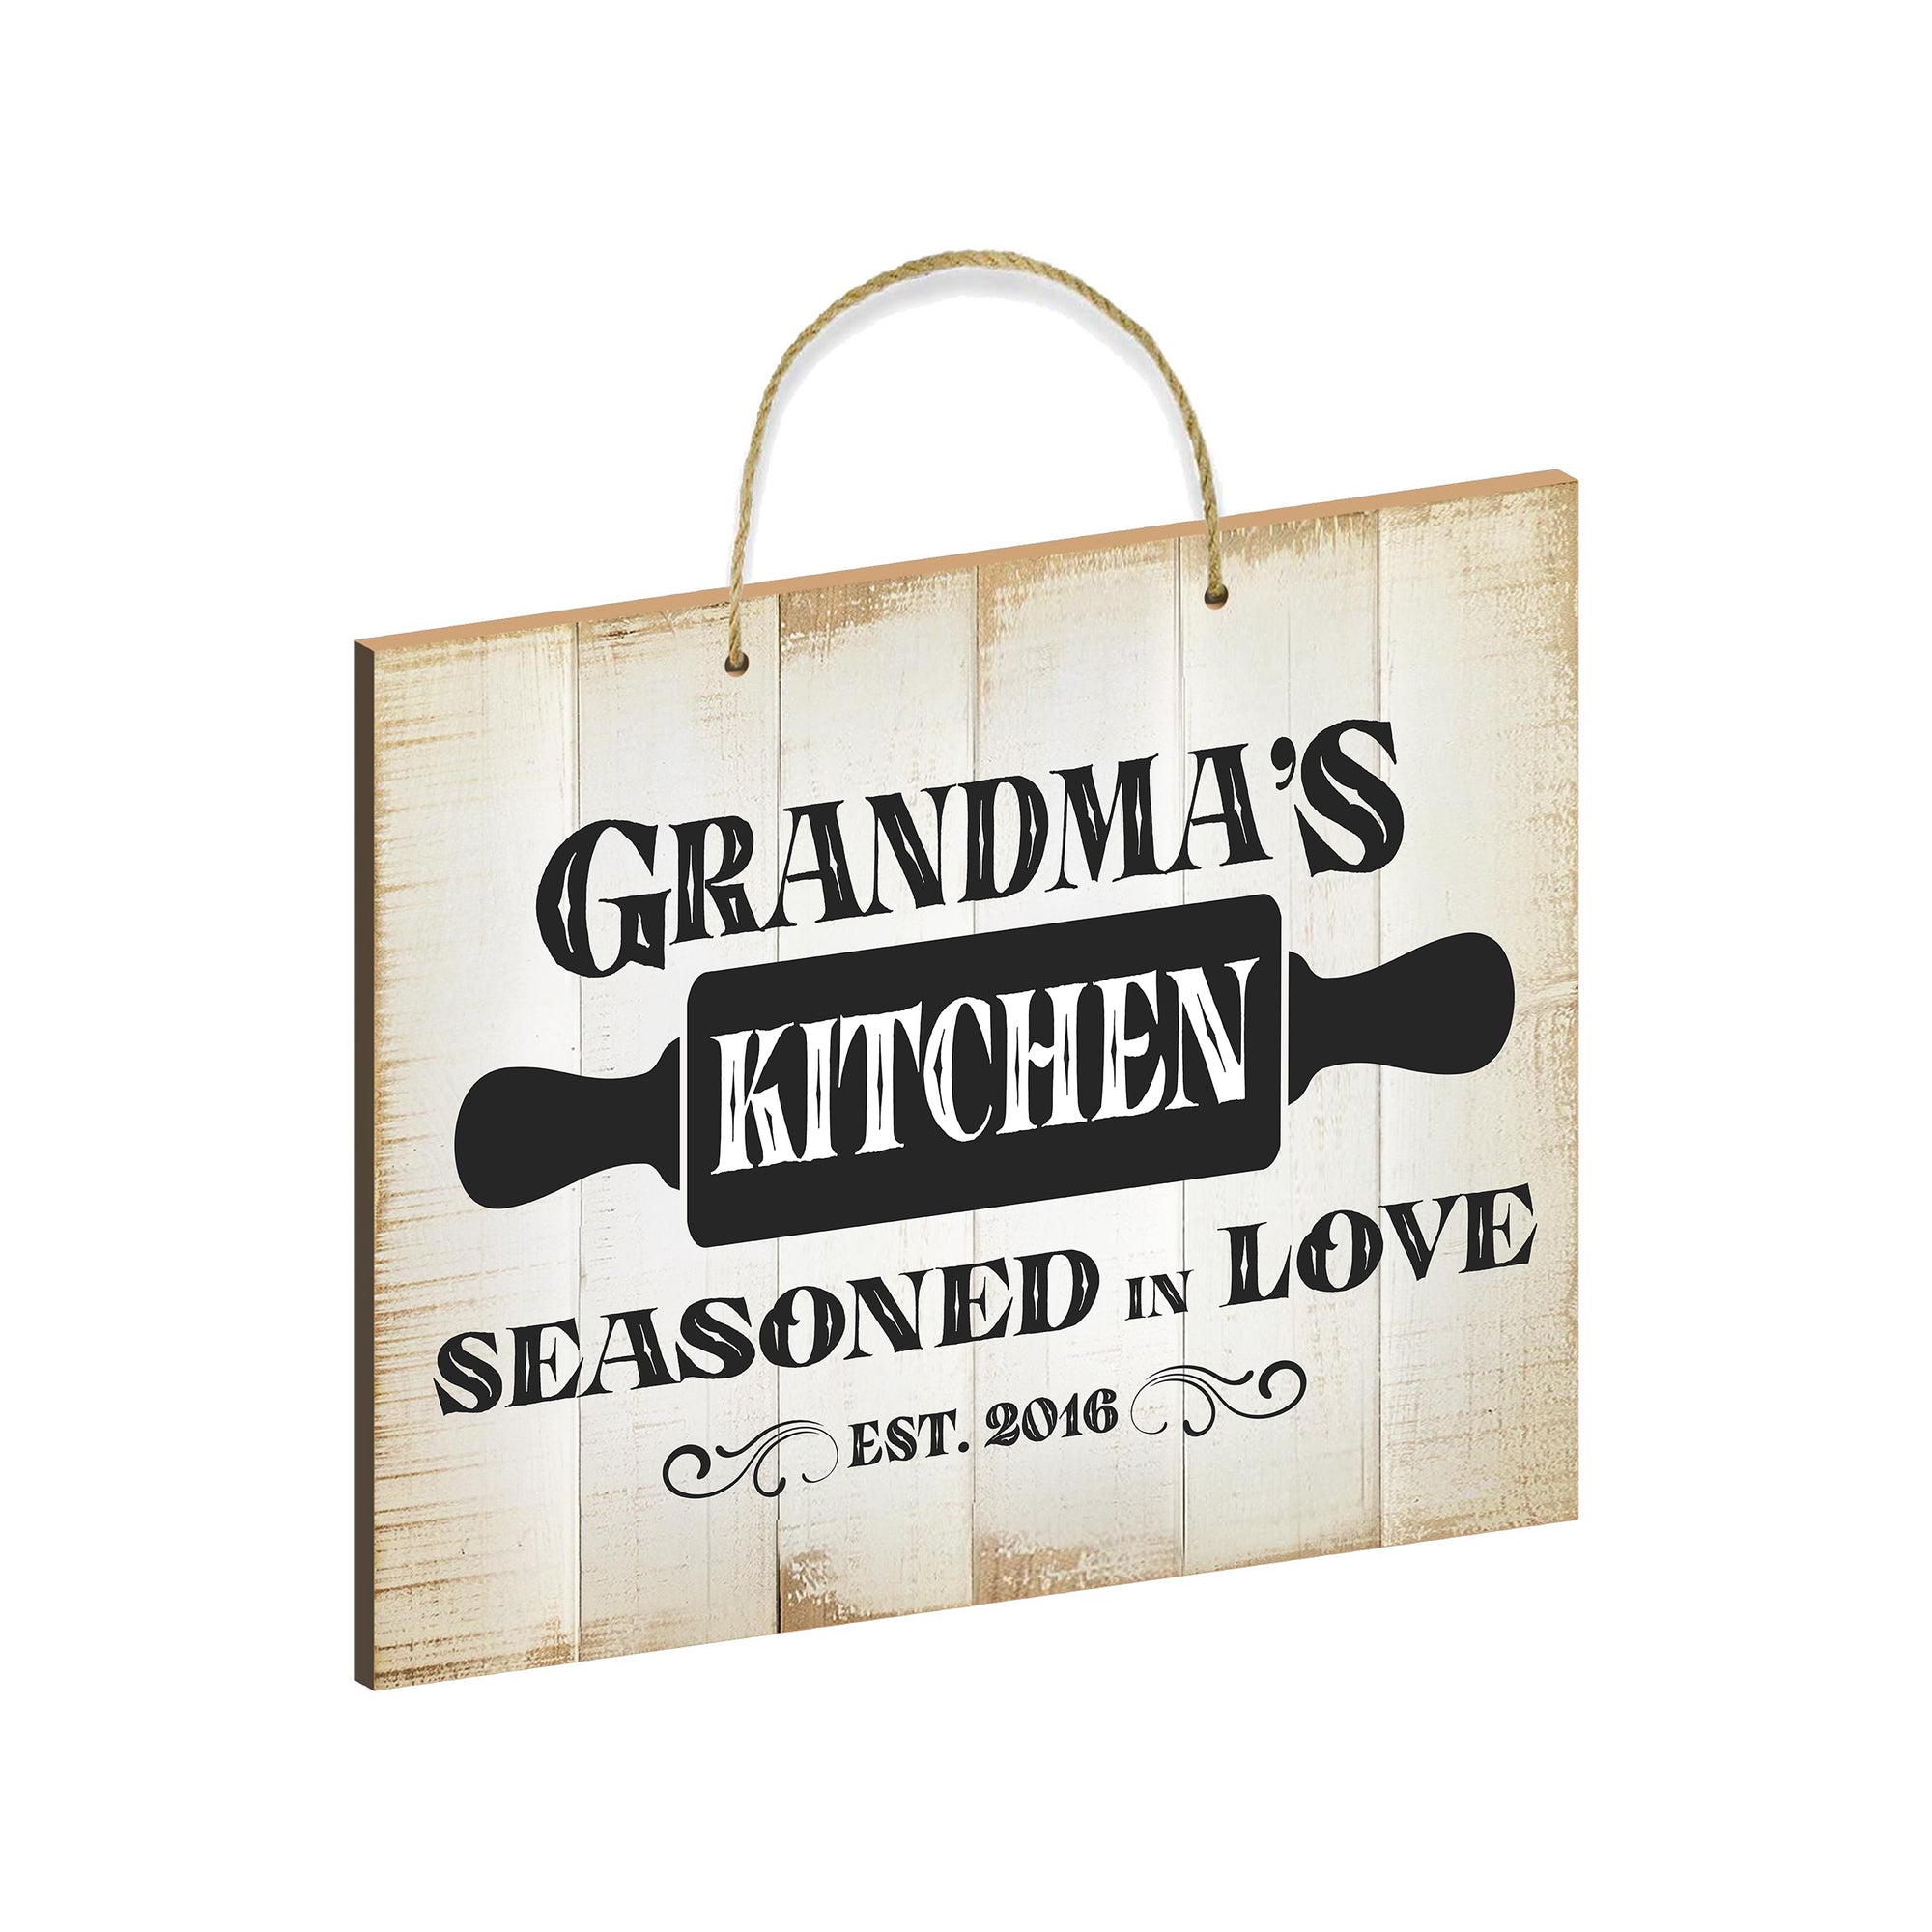 Rustic-Inspired Wooden Wall Hanging Rope Sign For Kitchen & Home Décor - Seasoned